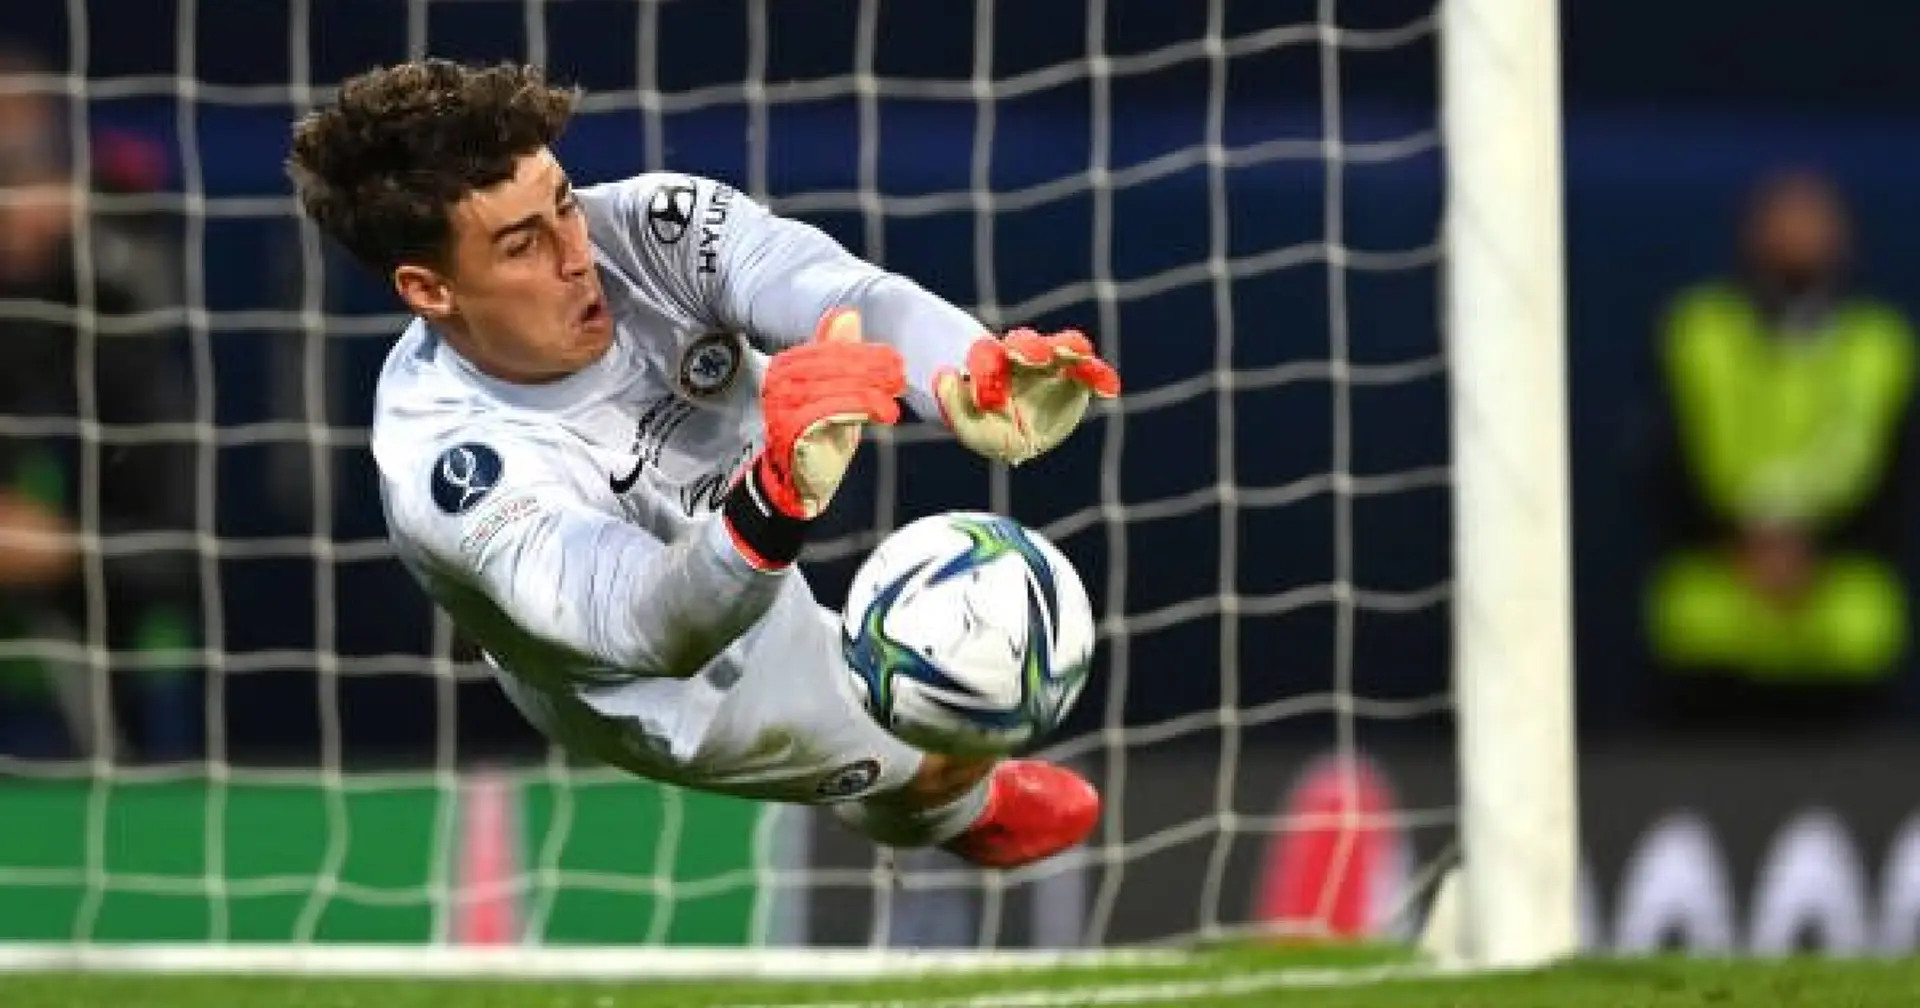 'He has ability to read minds': Michels praises Kepa after Plymouth heroics